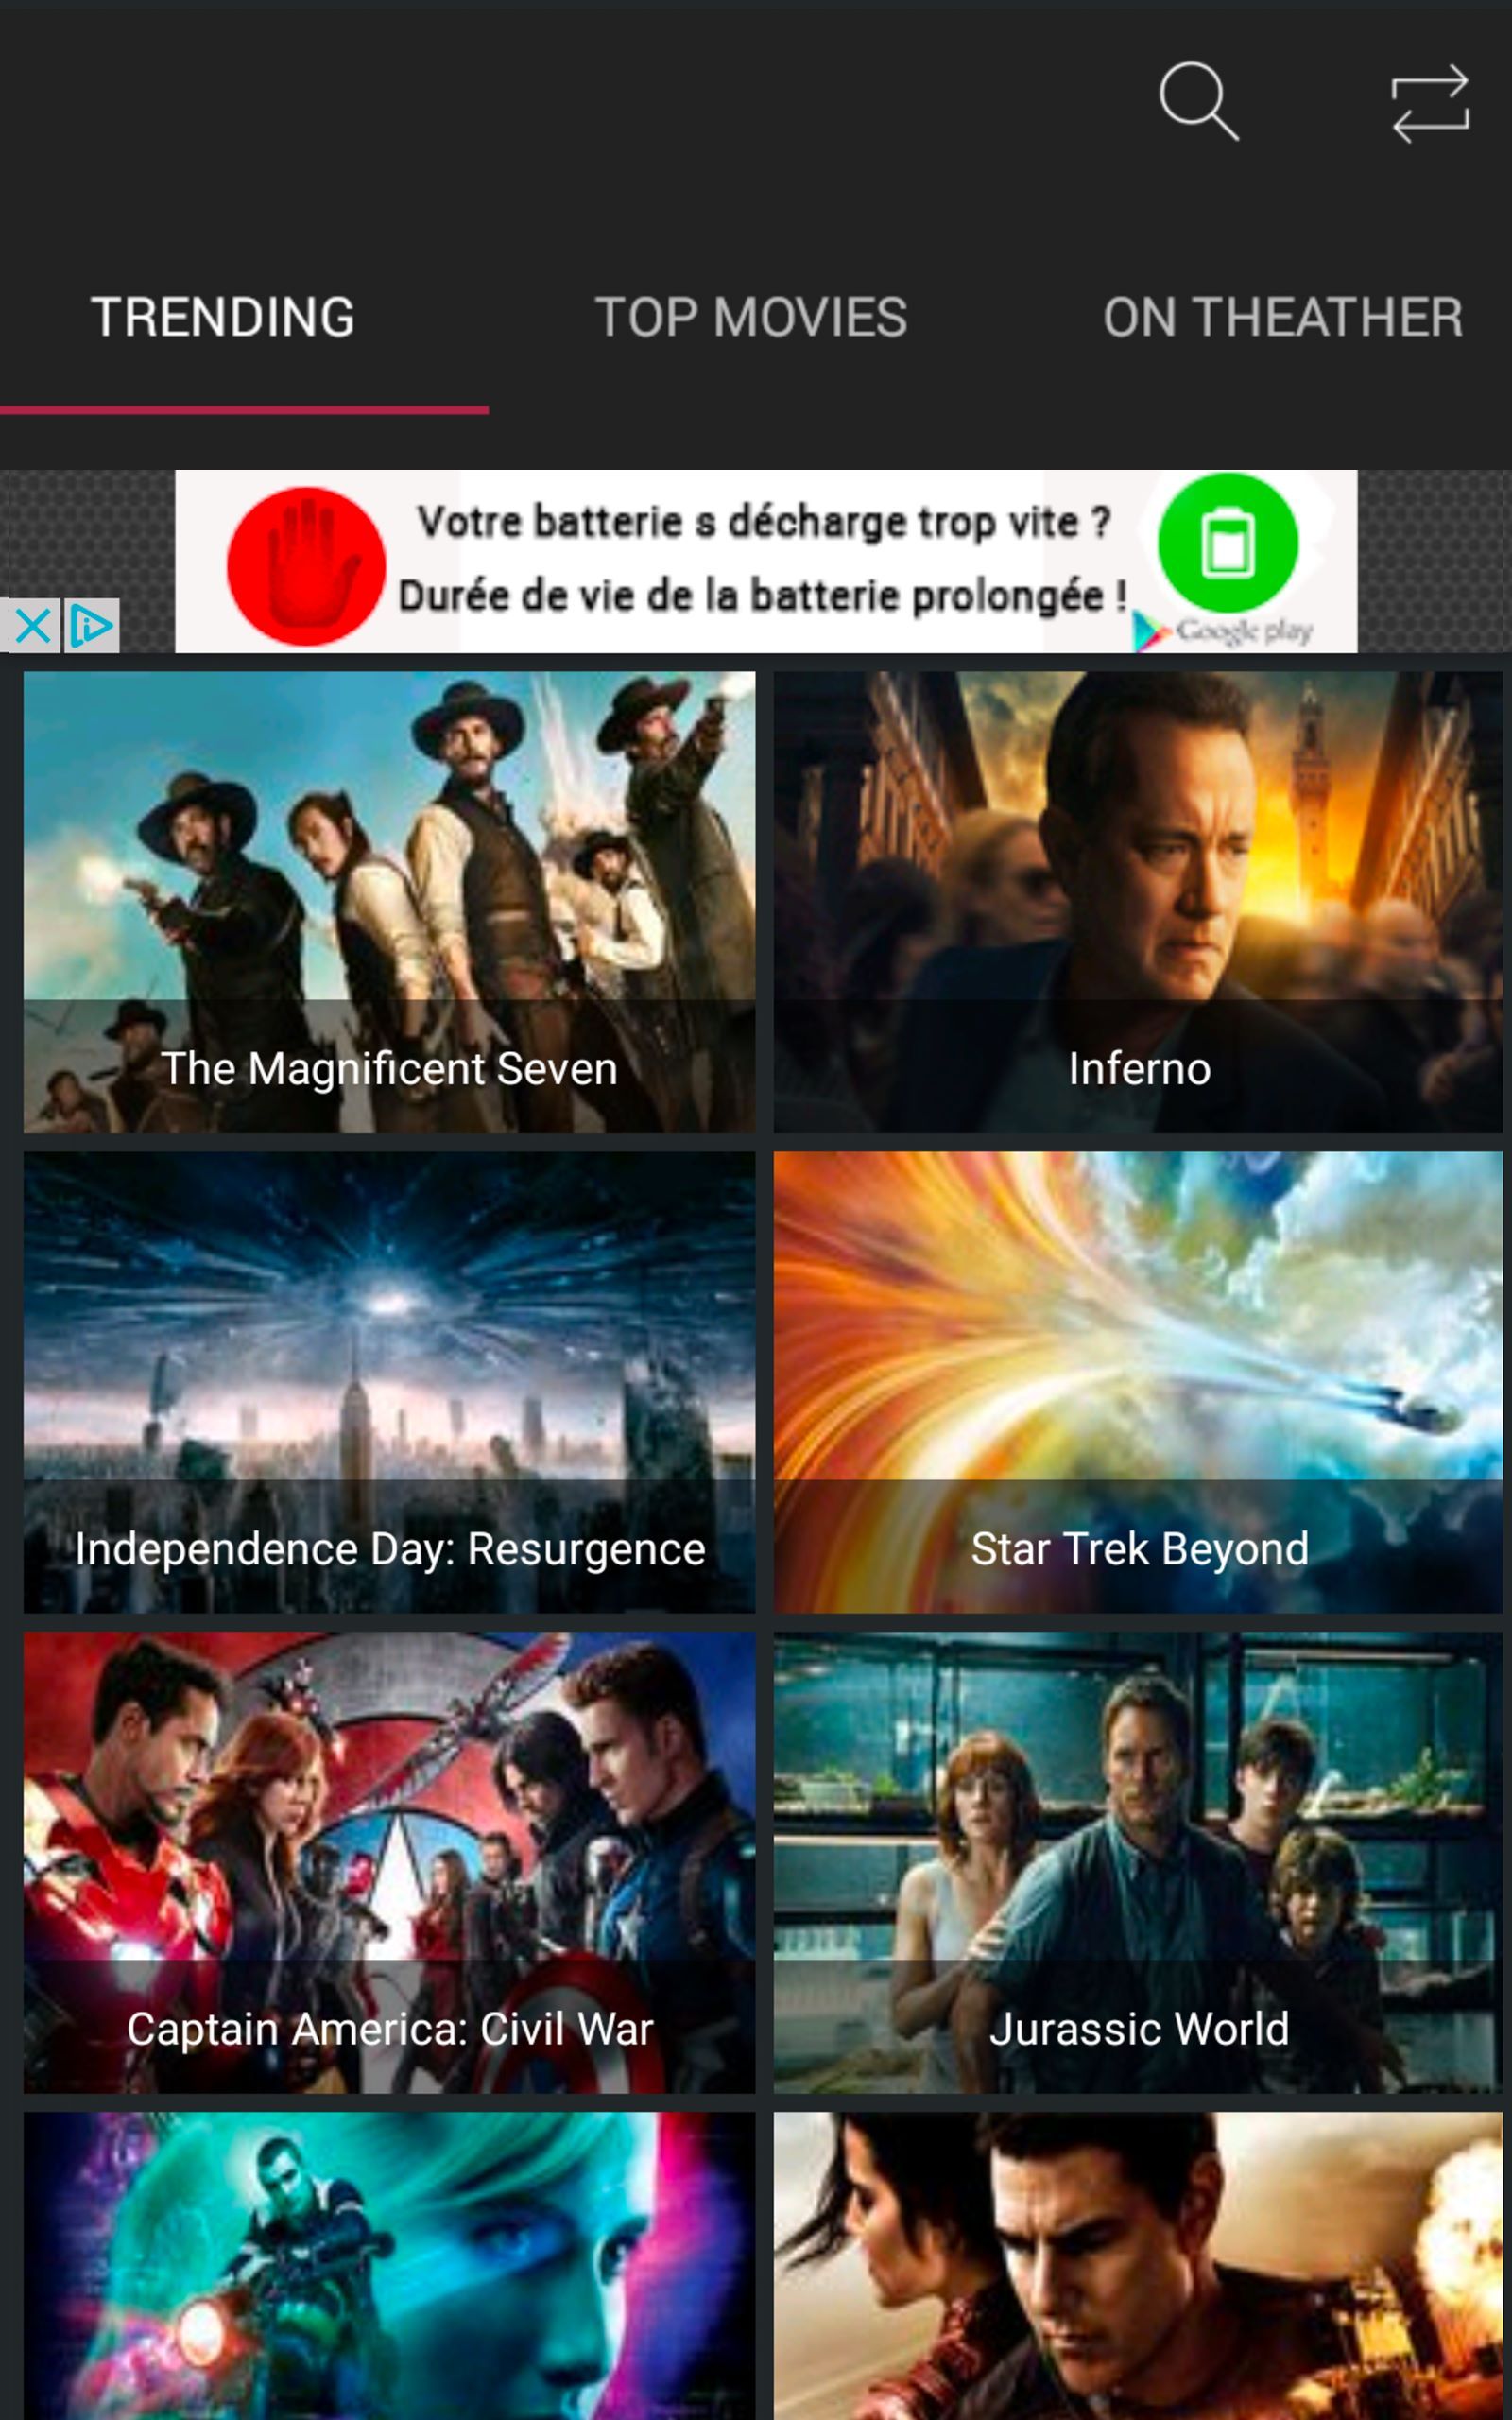 Mob Movie dro TV App : Free Movies & Shows Guide Recommendation For Kindle Fire HD